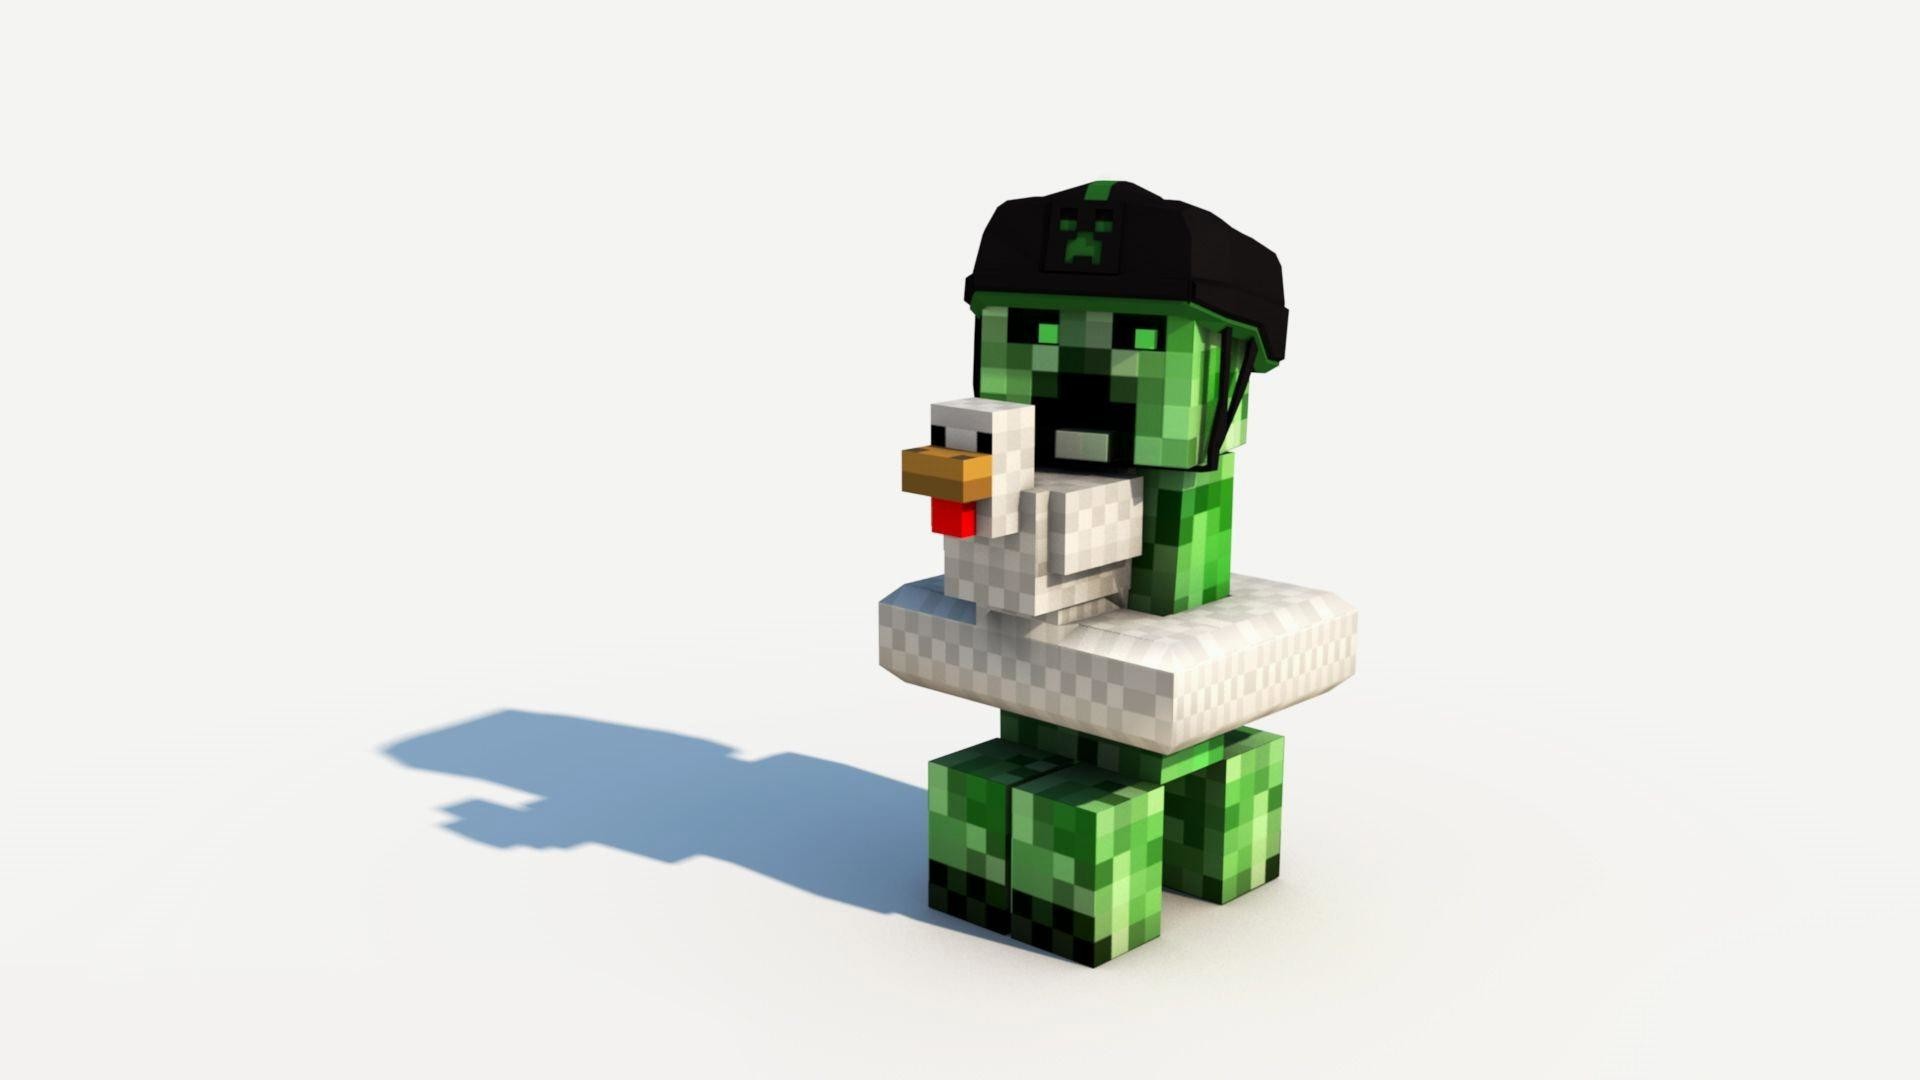 1920x1080 wallpaper.wiki--Minecraft-Creeper-Iphone-Image-PIC-